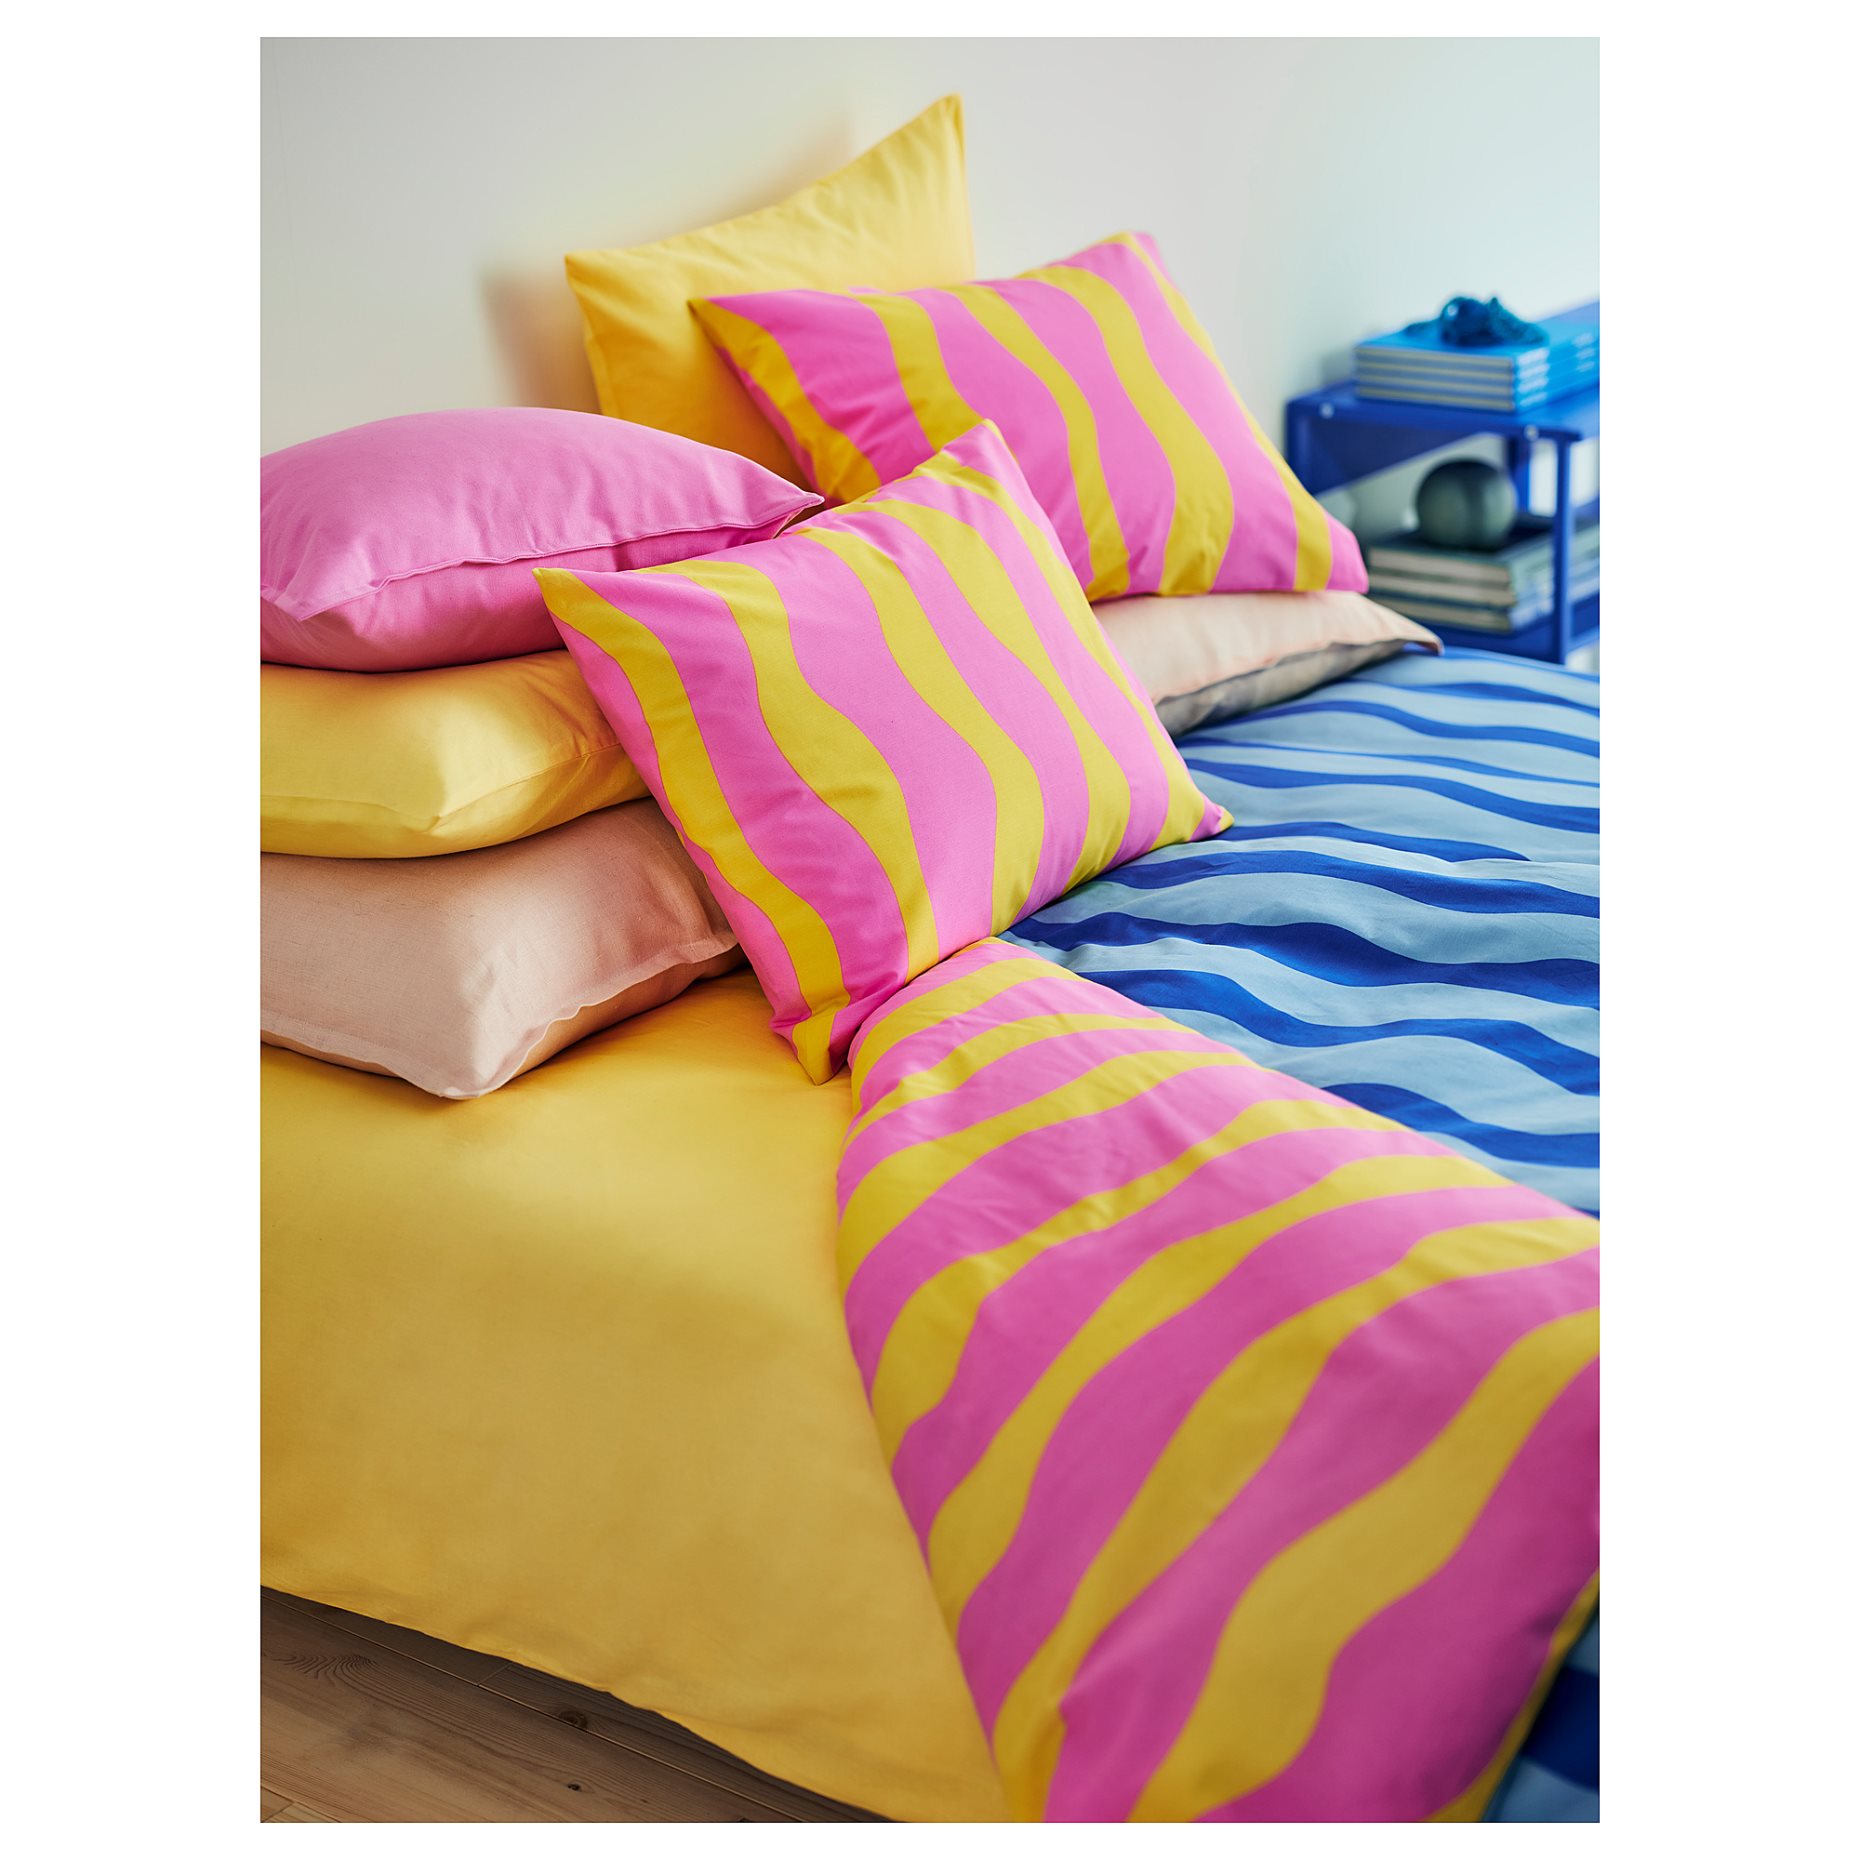 SOMMARVICKER, duvet cover and pillowcase, 150x200/50x60 cm, 105.546.84